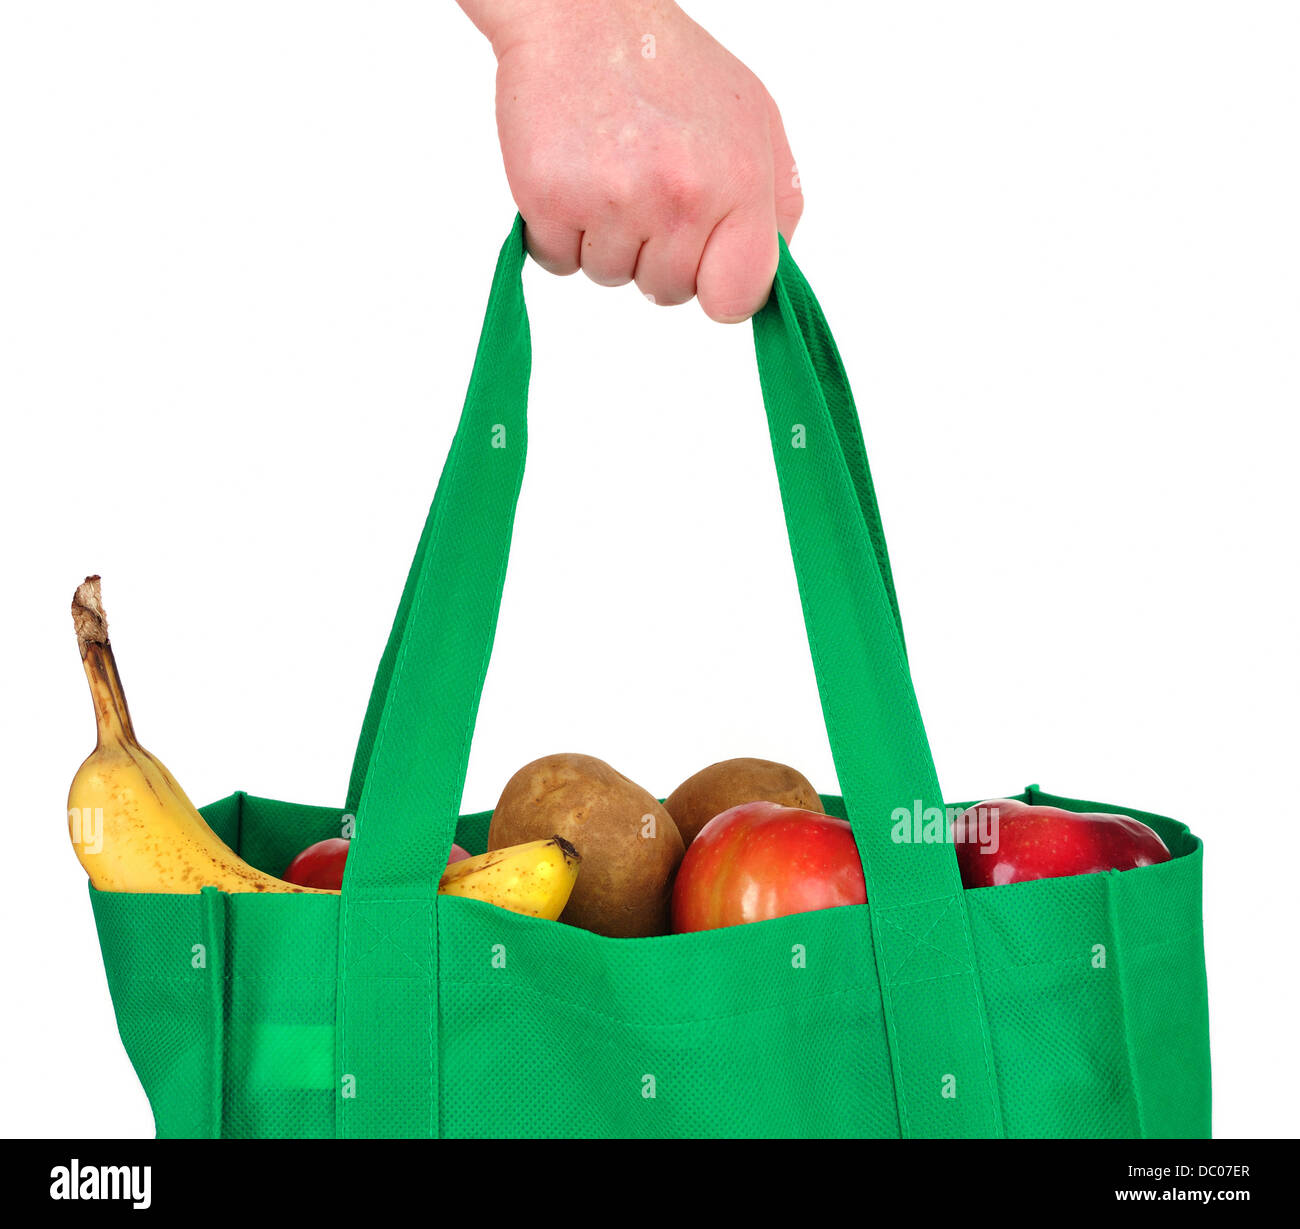 Carrying shopping - fruit and vegetables - in a green reusable shopping bag Stock Photo